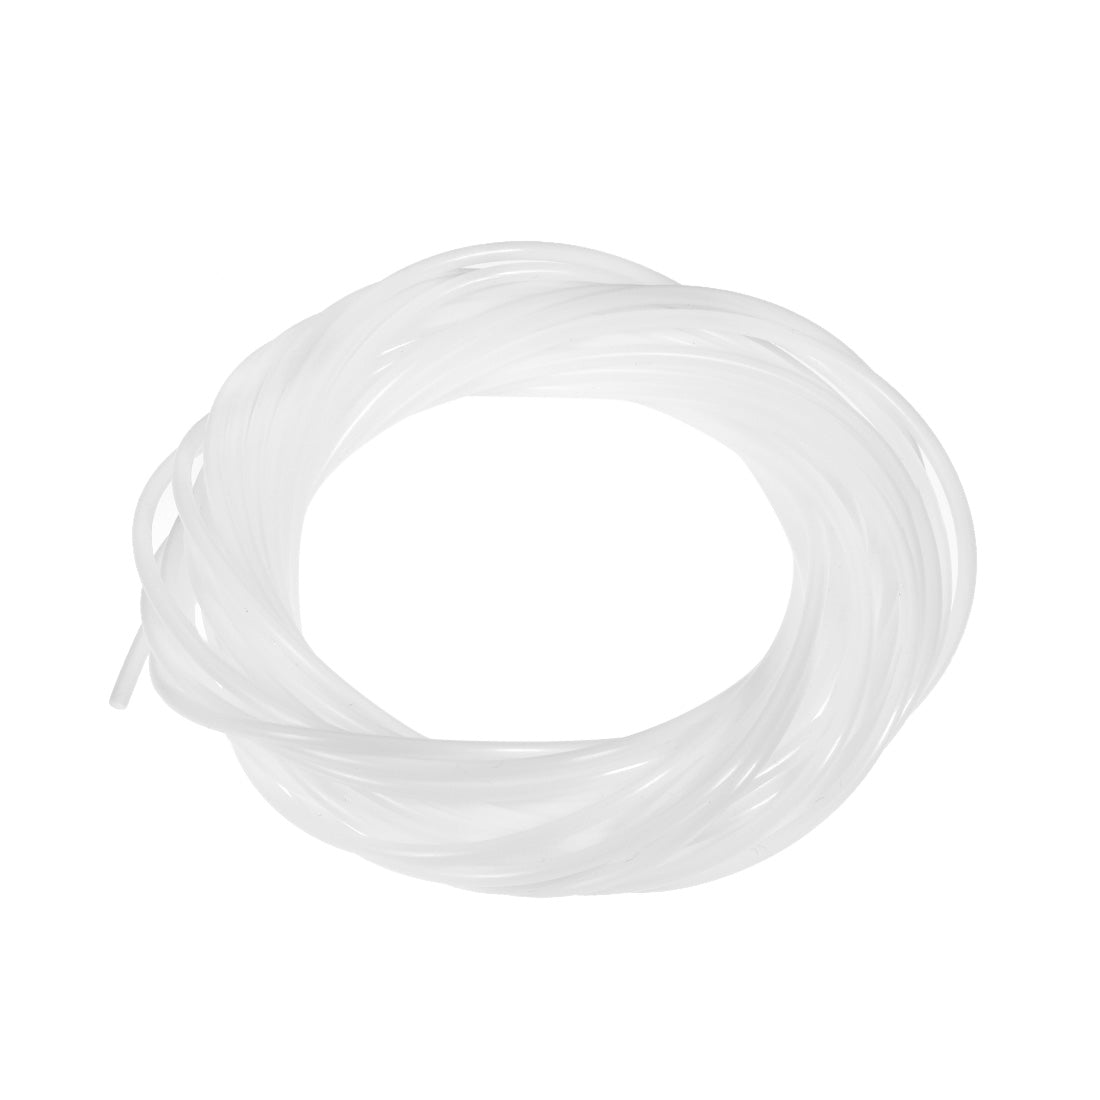 uxcell Uxcell PTFE Tube 26Ft - ID 2mm x OD 3mm Fit 1.75 Filament for 3D Printer White